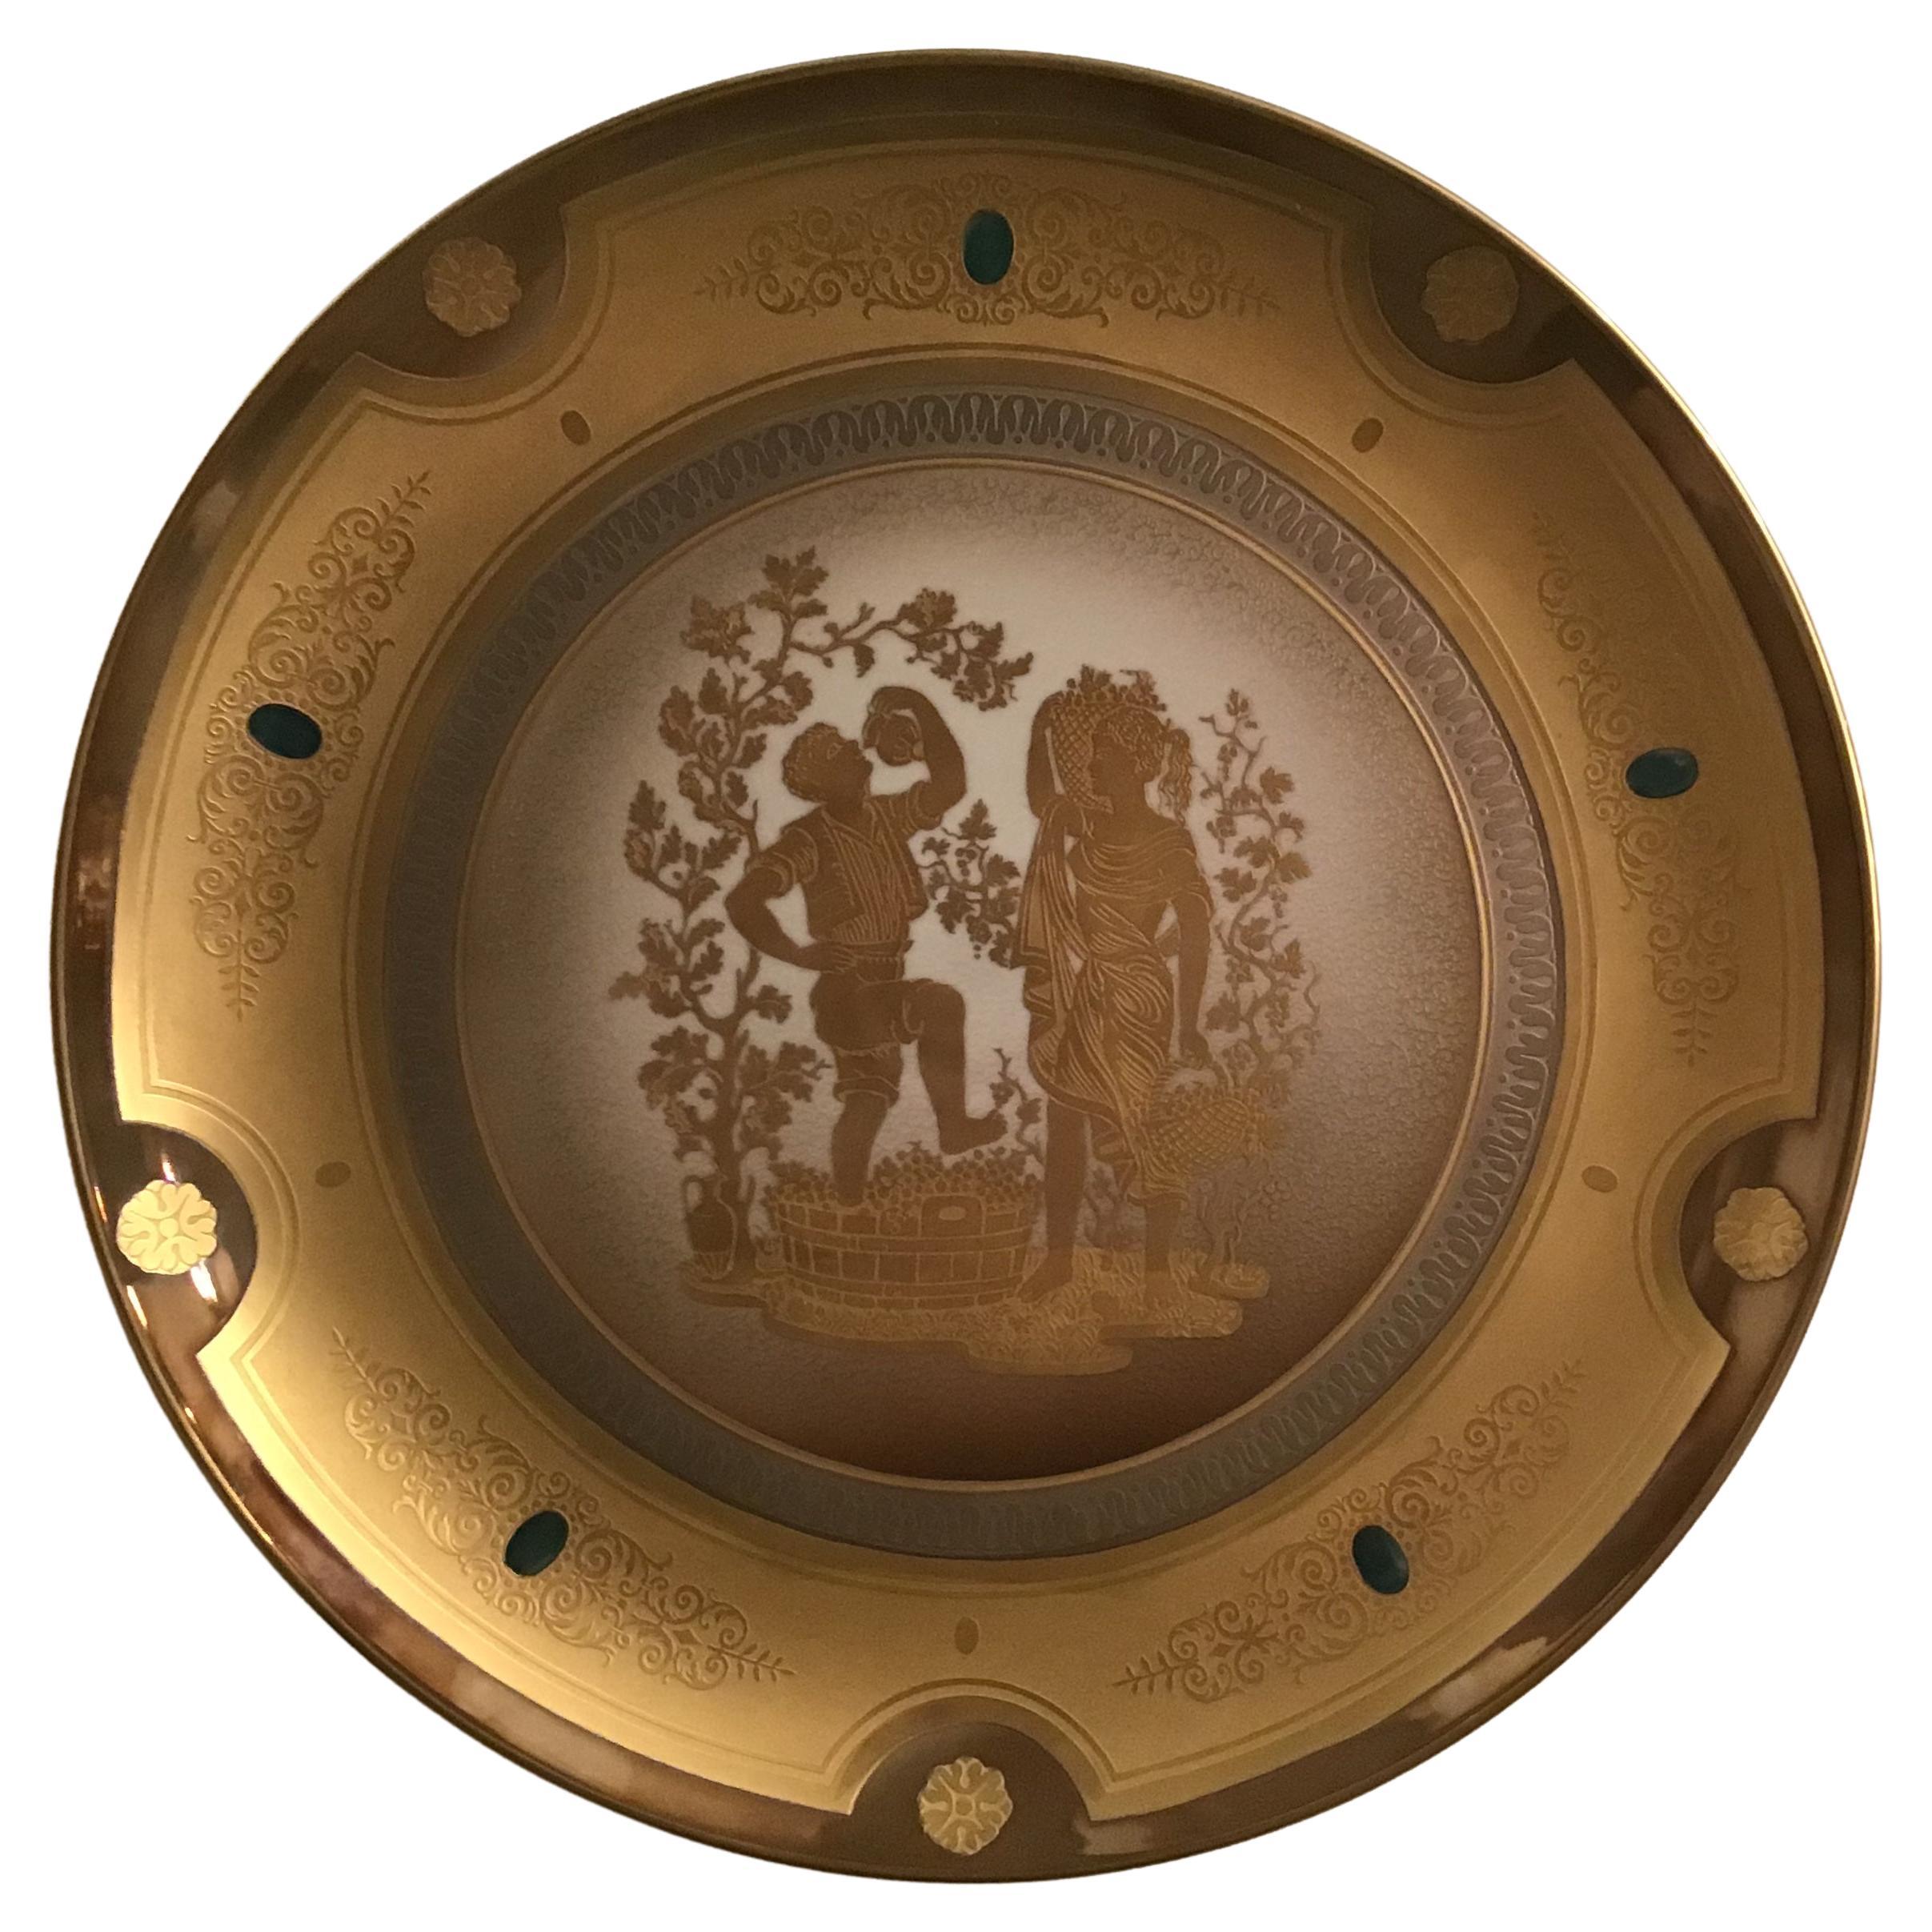 Morbelli Porcelain Wall Plate Gold “ Autunno”, 1960, Italy For Sale